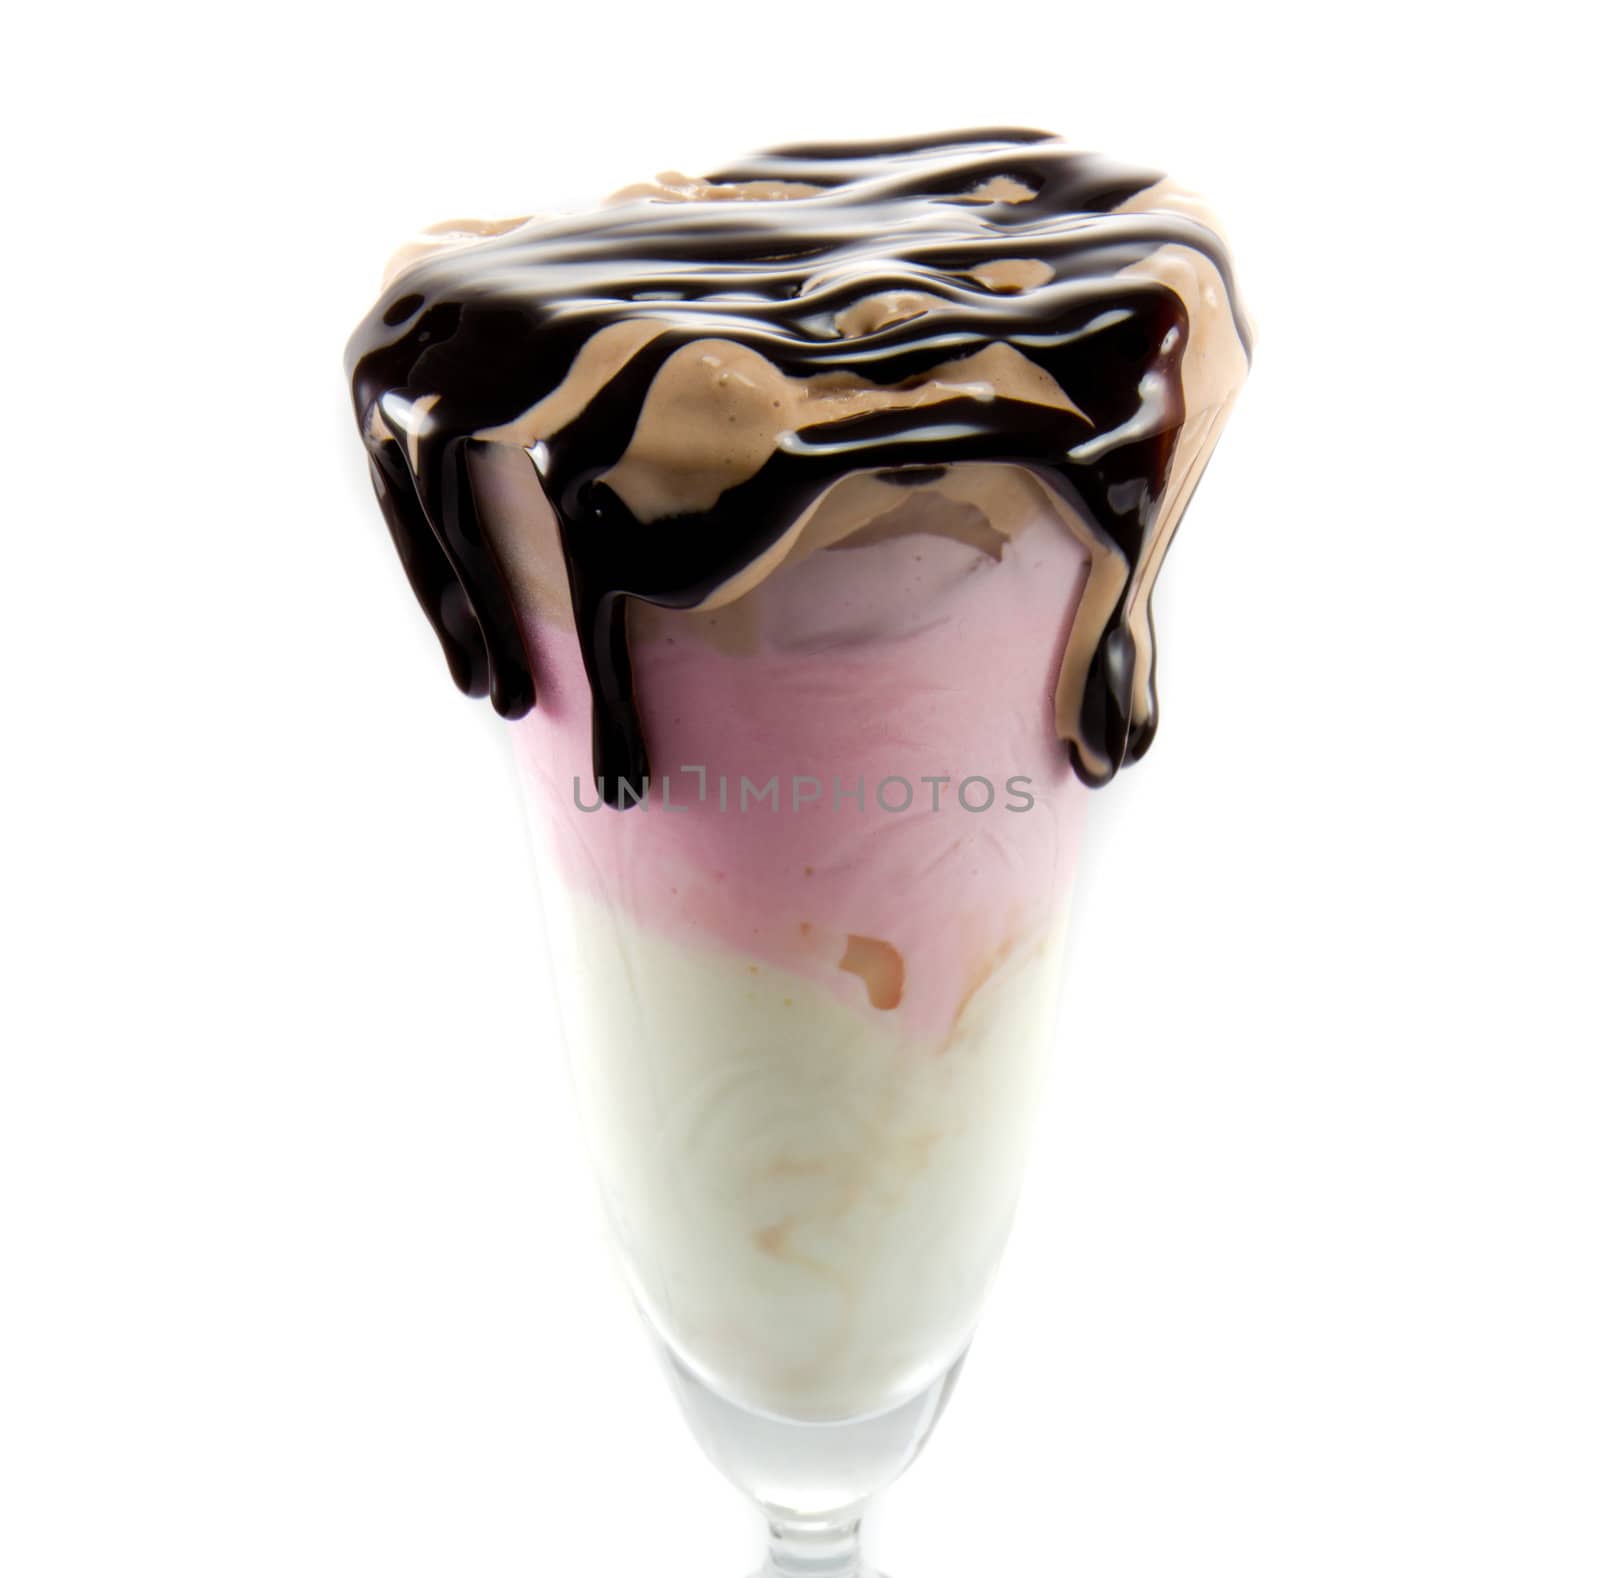 icecream in a wine glass with melted chocolate dripping by Stootsy